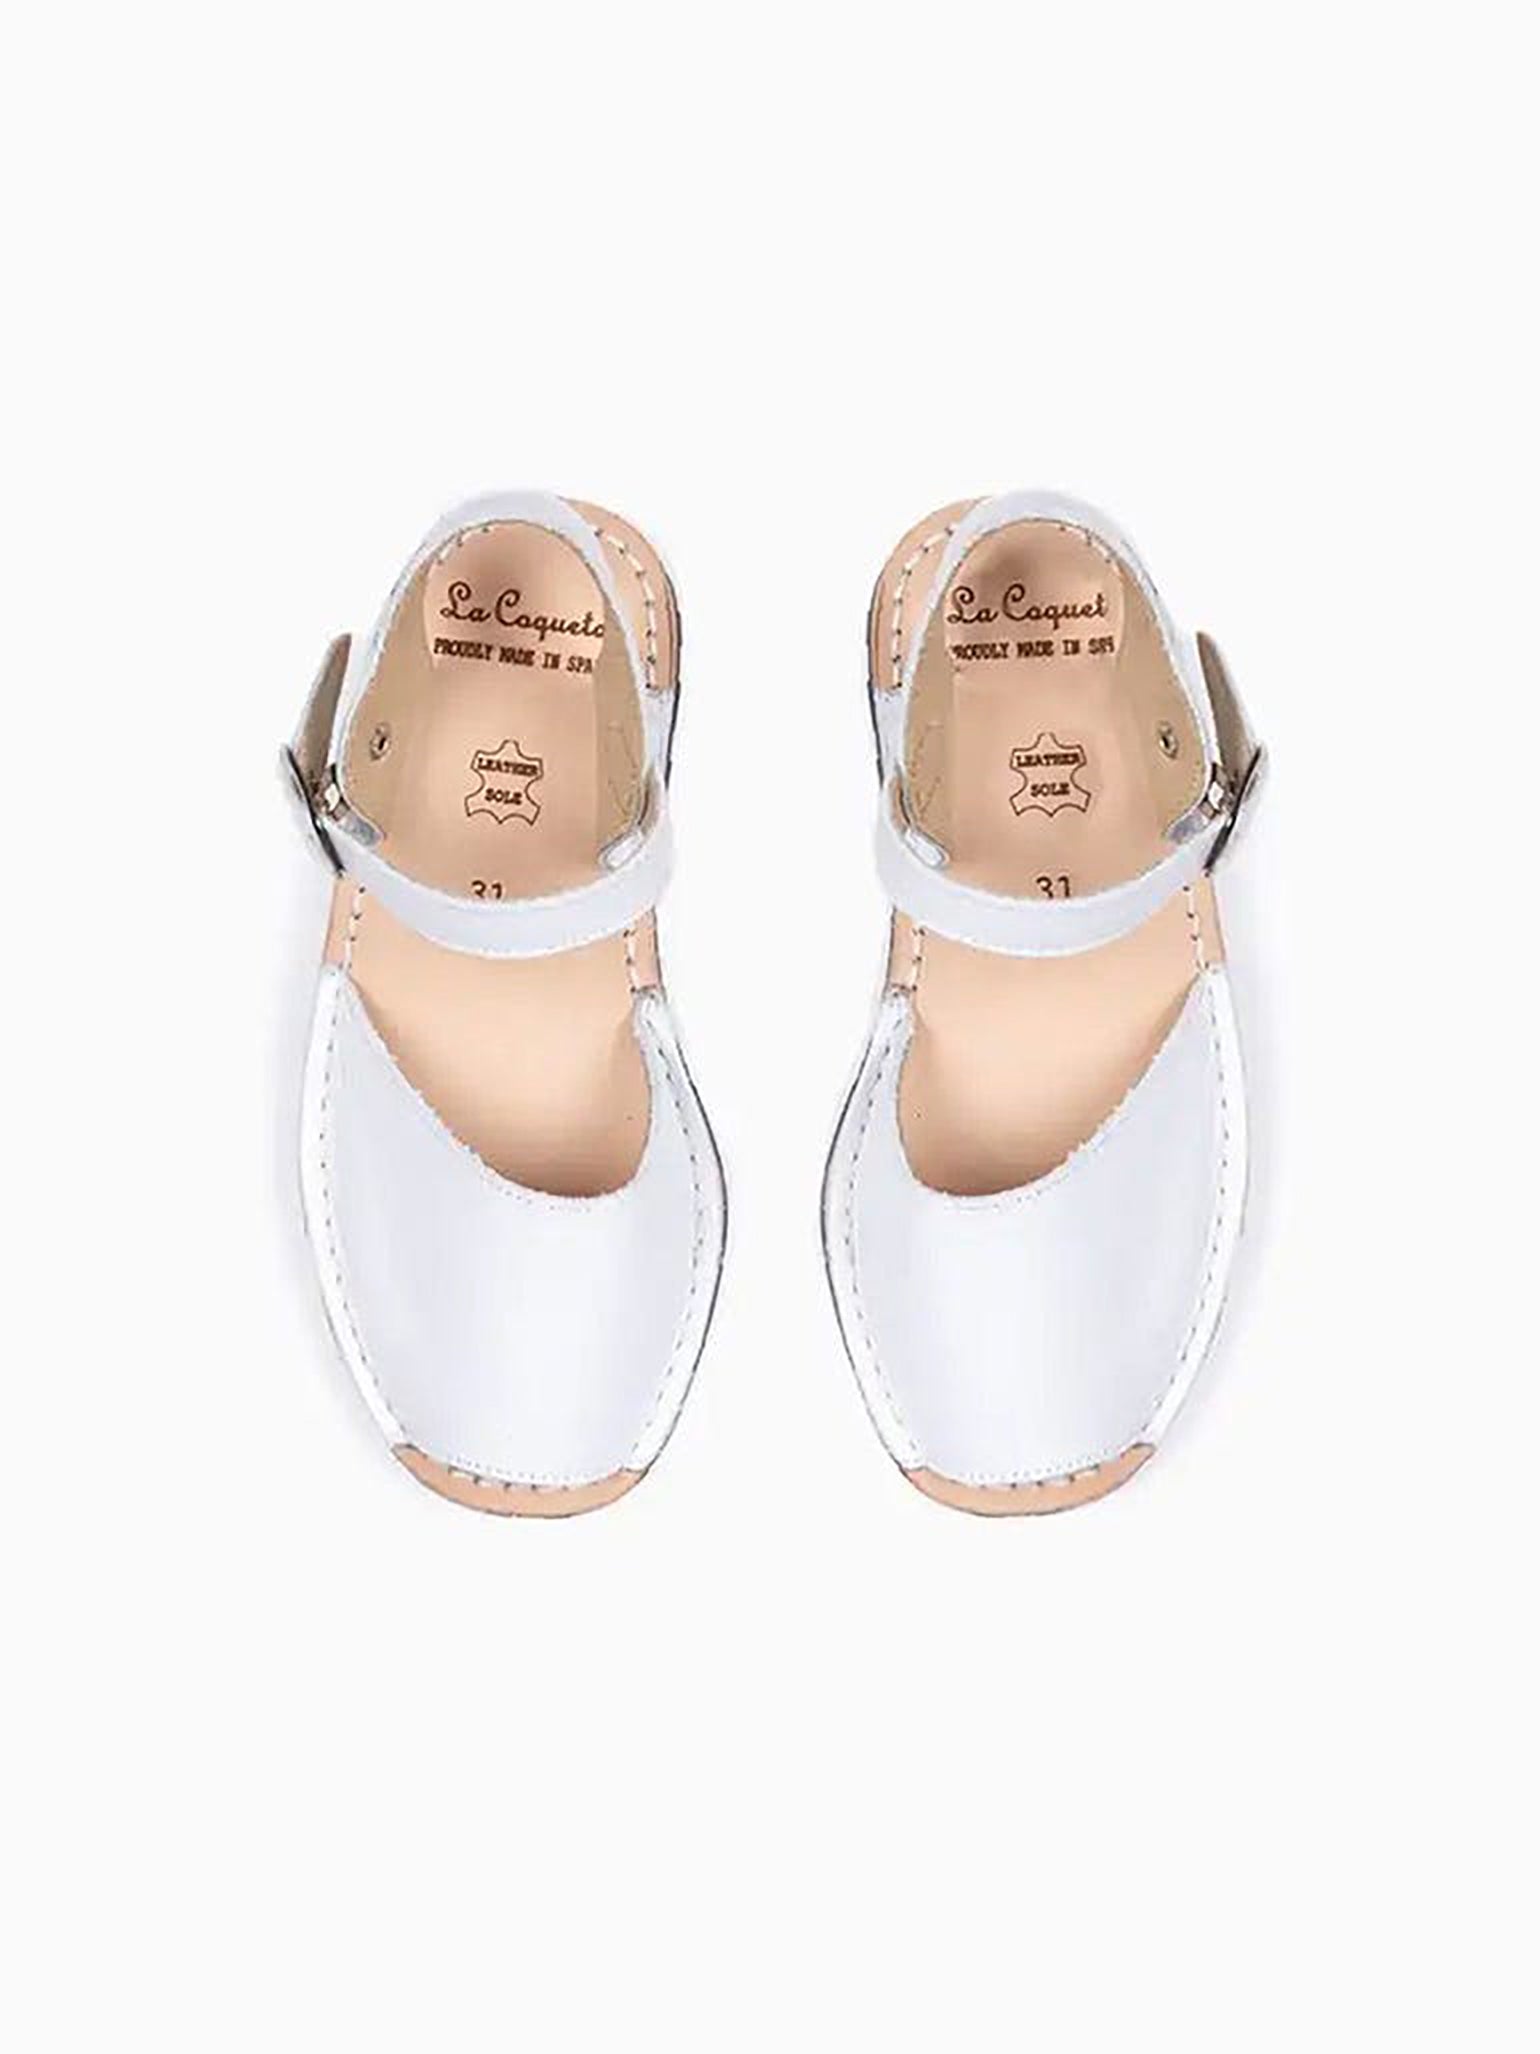 Image of White Avarca Leather Kids Sandals